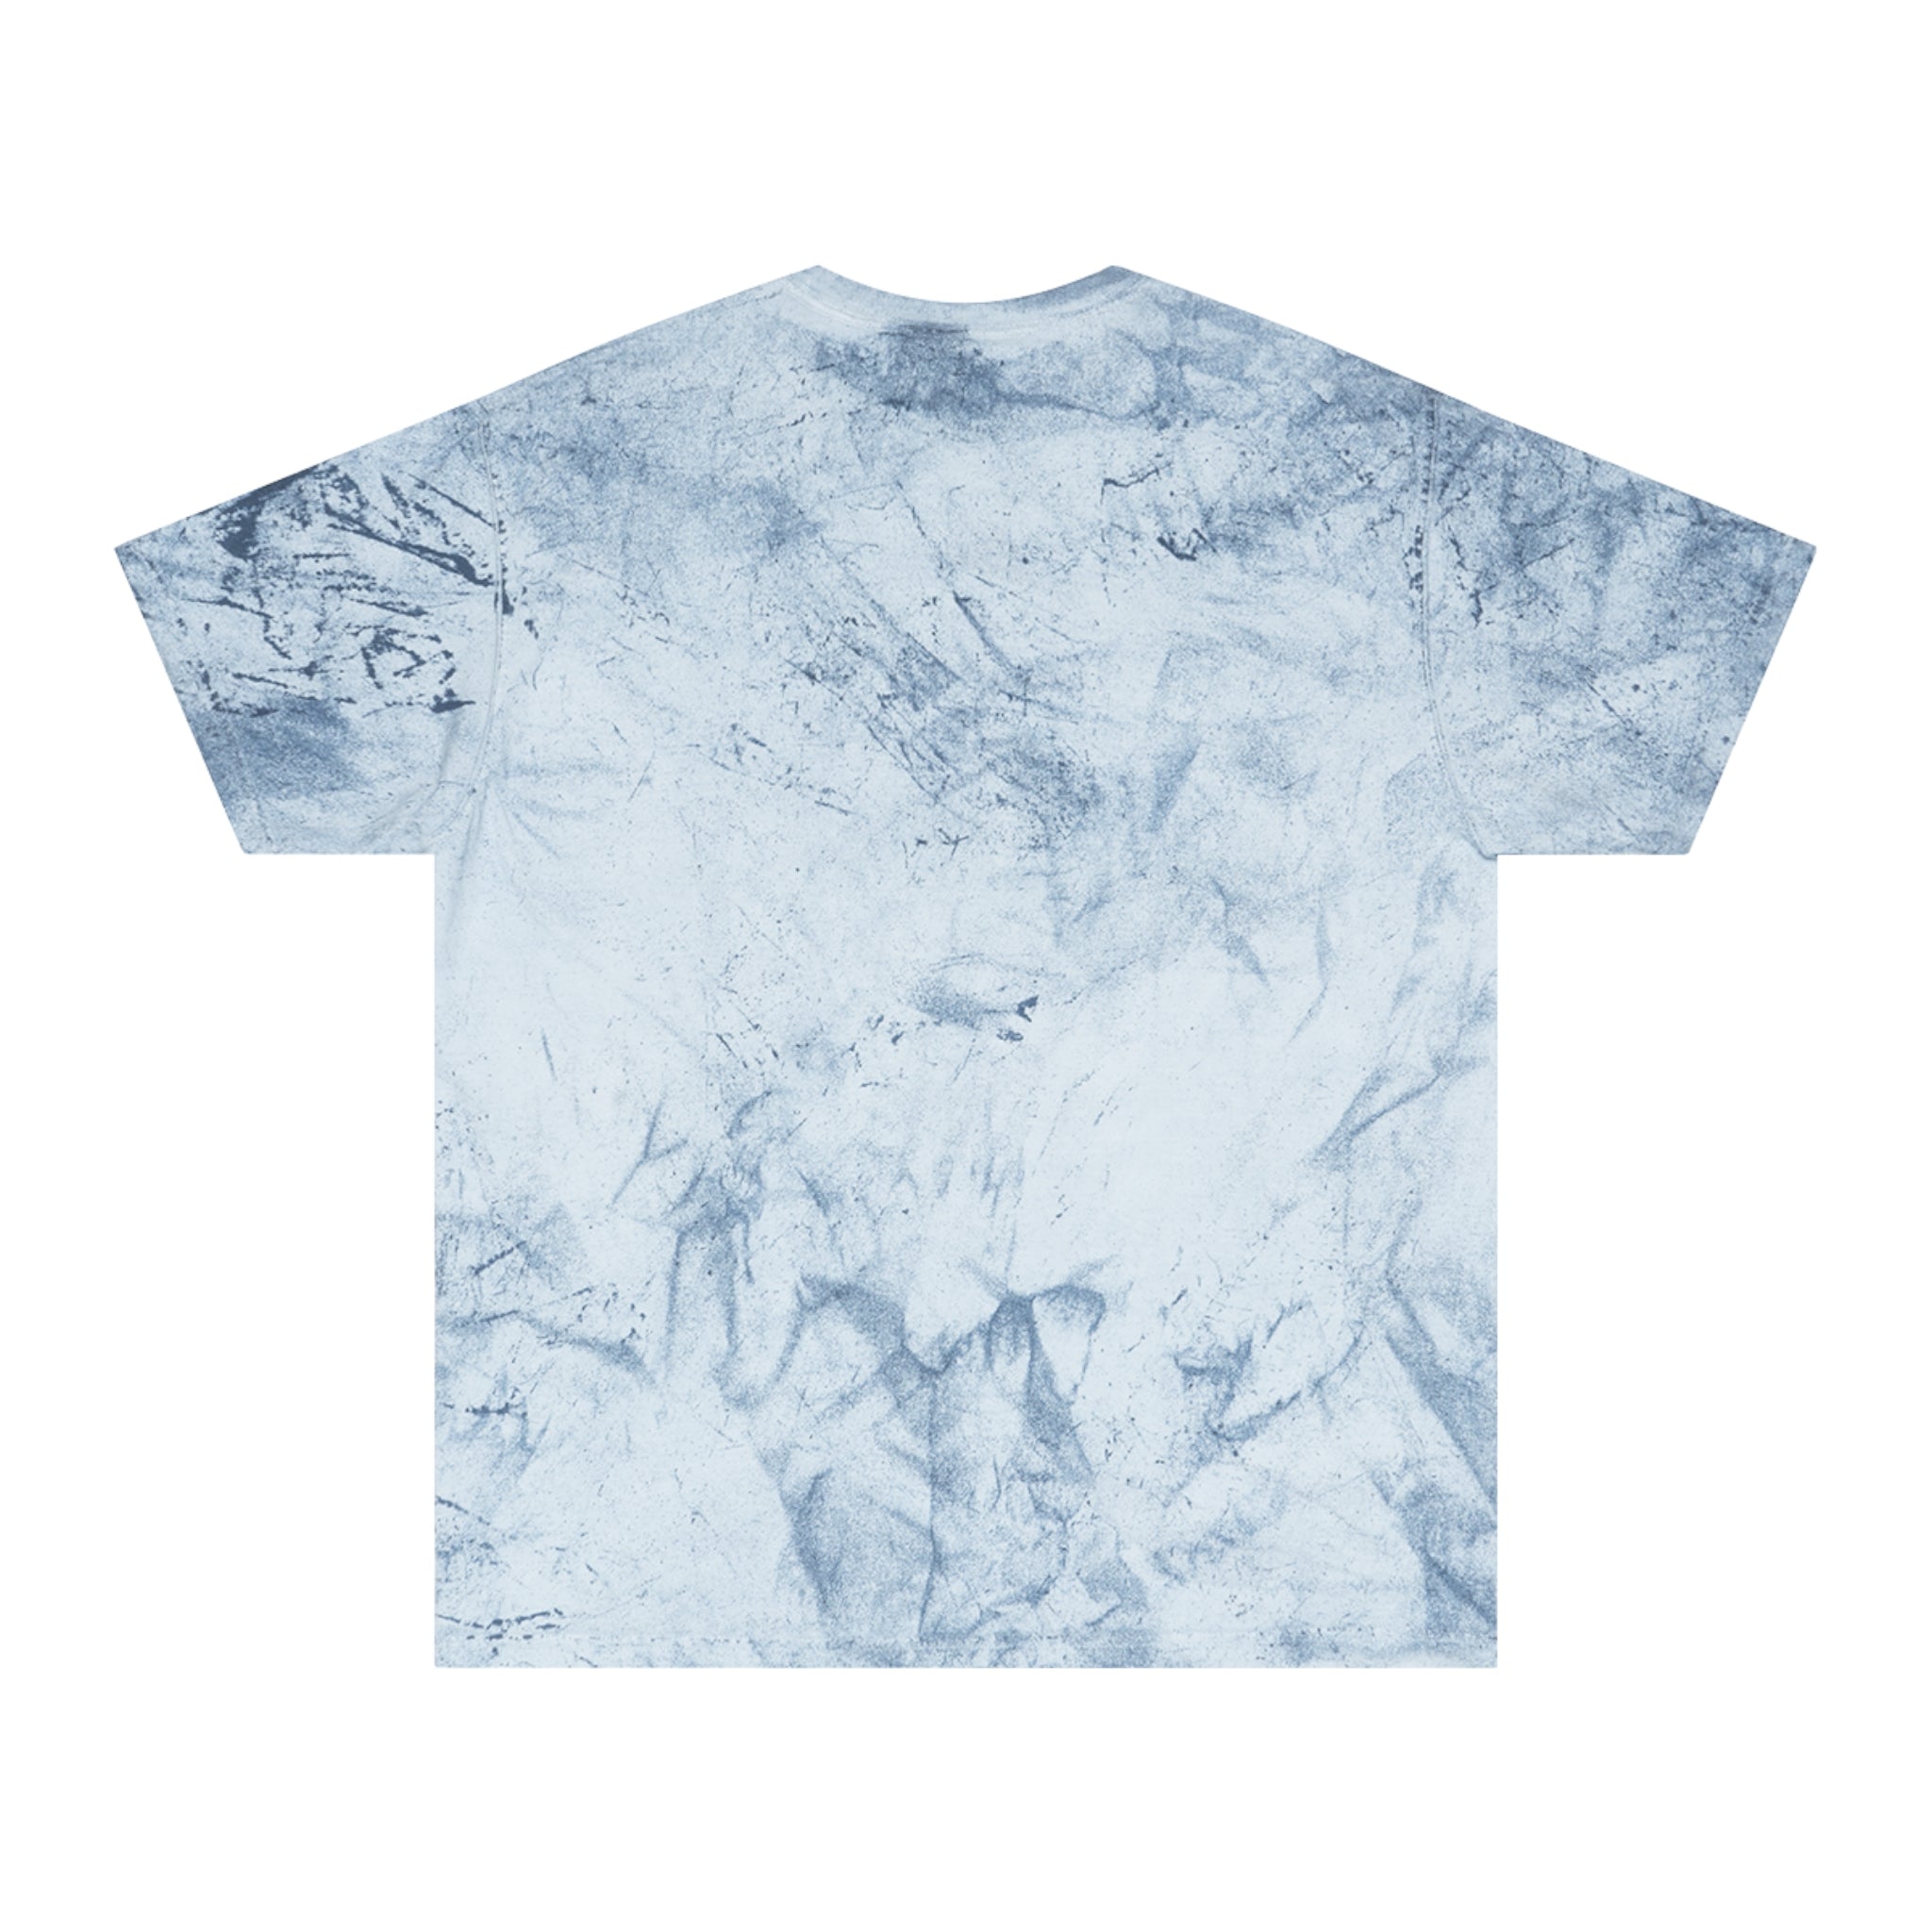 The Monk Garment Dyed Tee